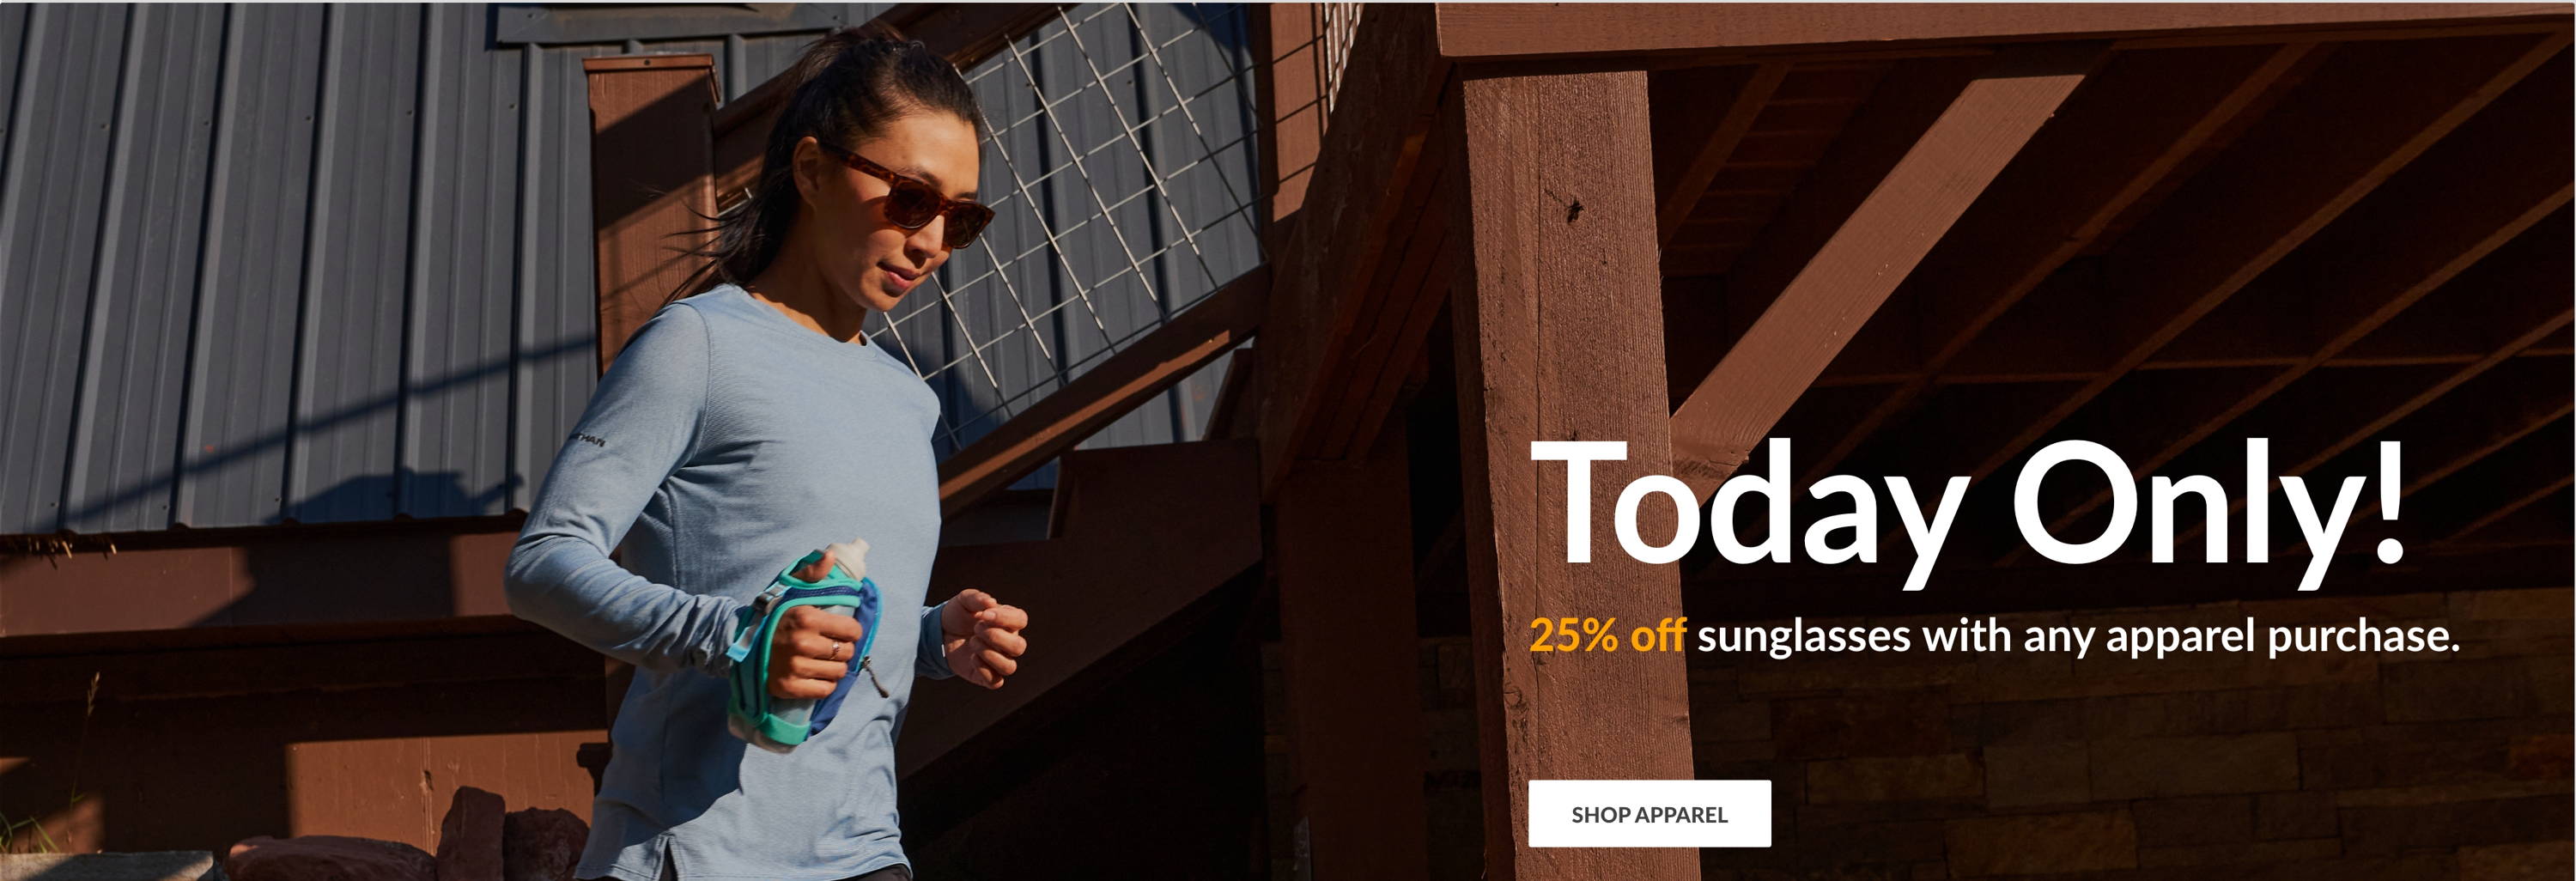 Today Only! 25% off sunglasses with any apparel purchase. Shop Apparel